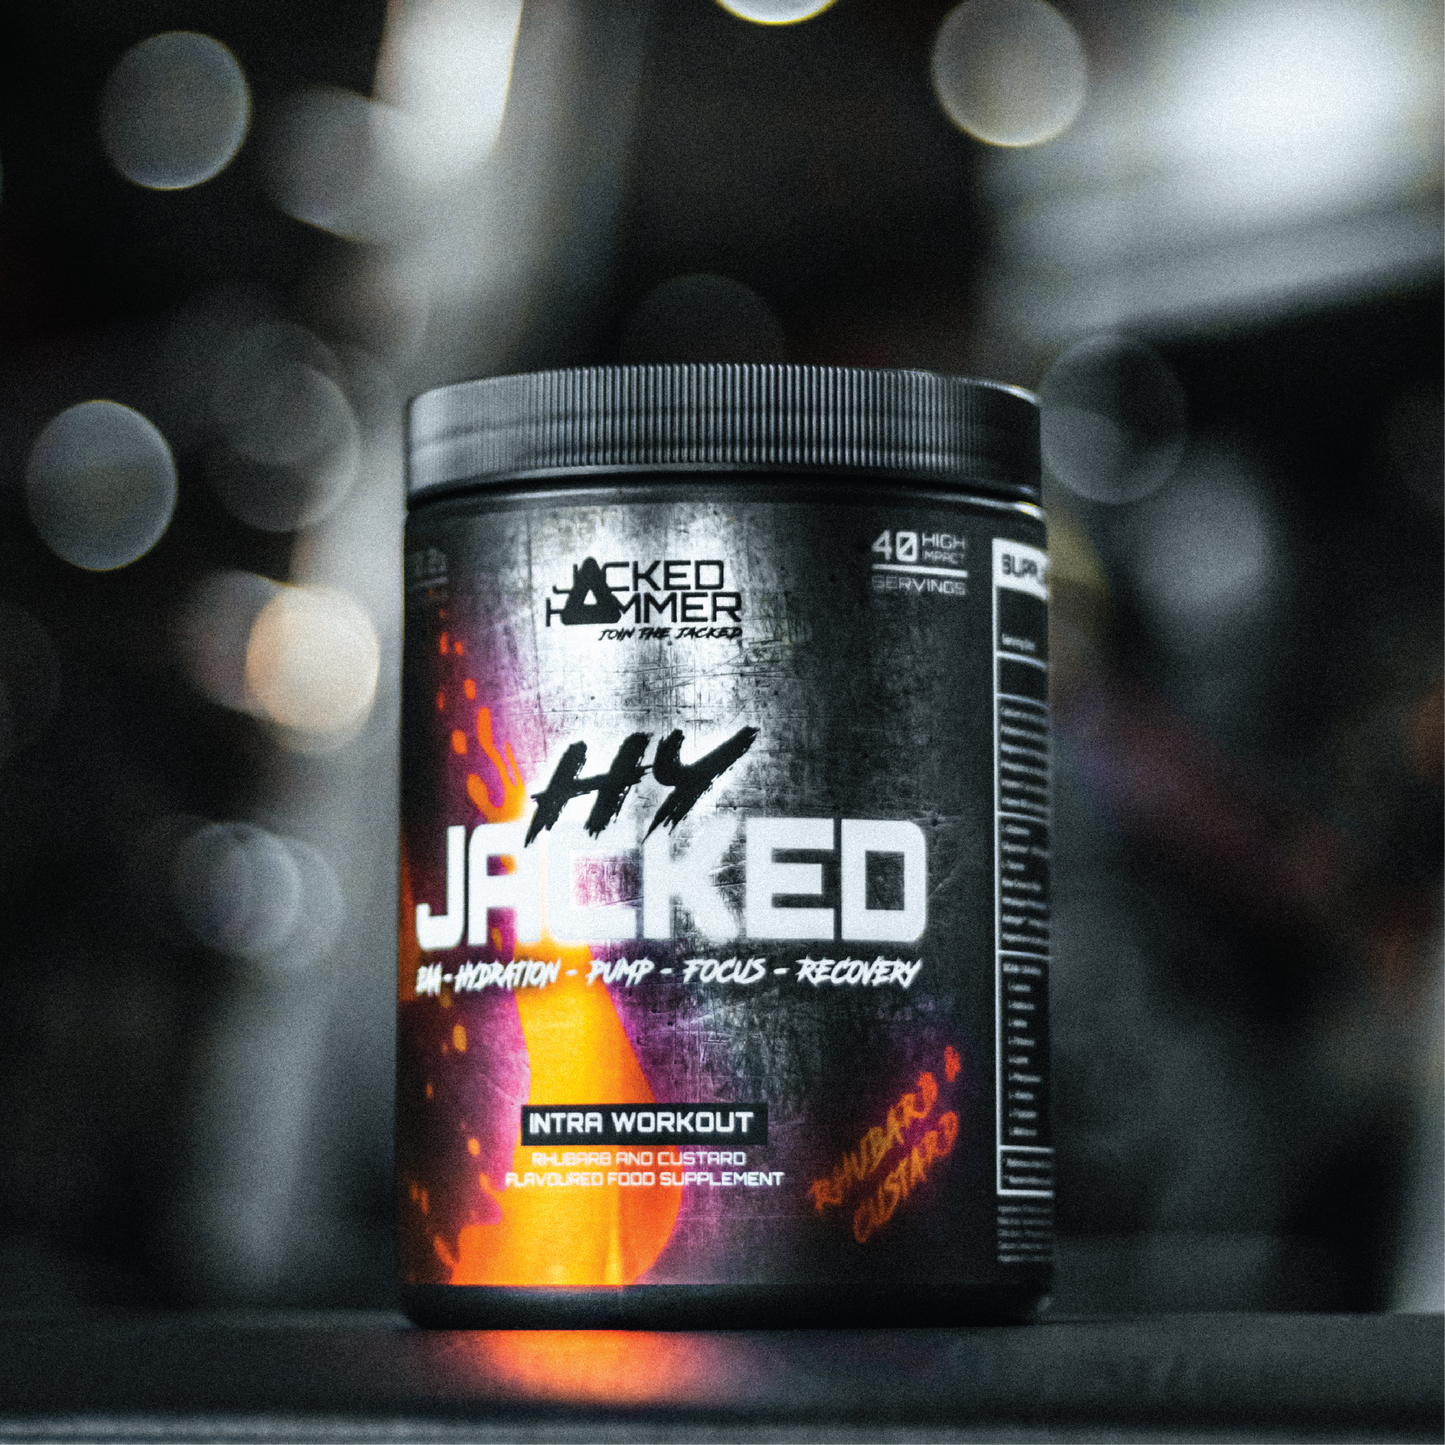 HyJacked - Complete Intra